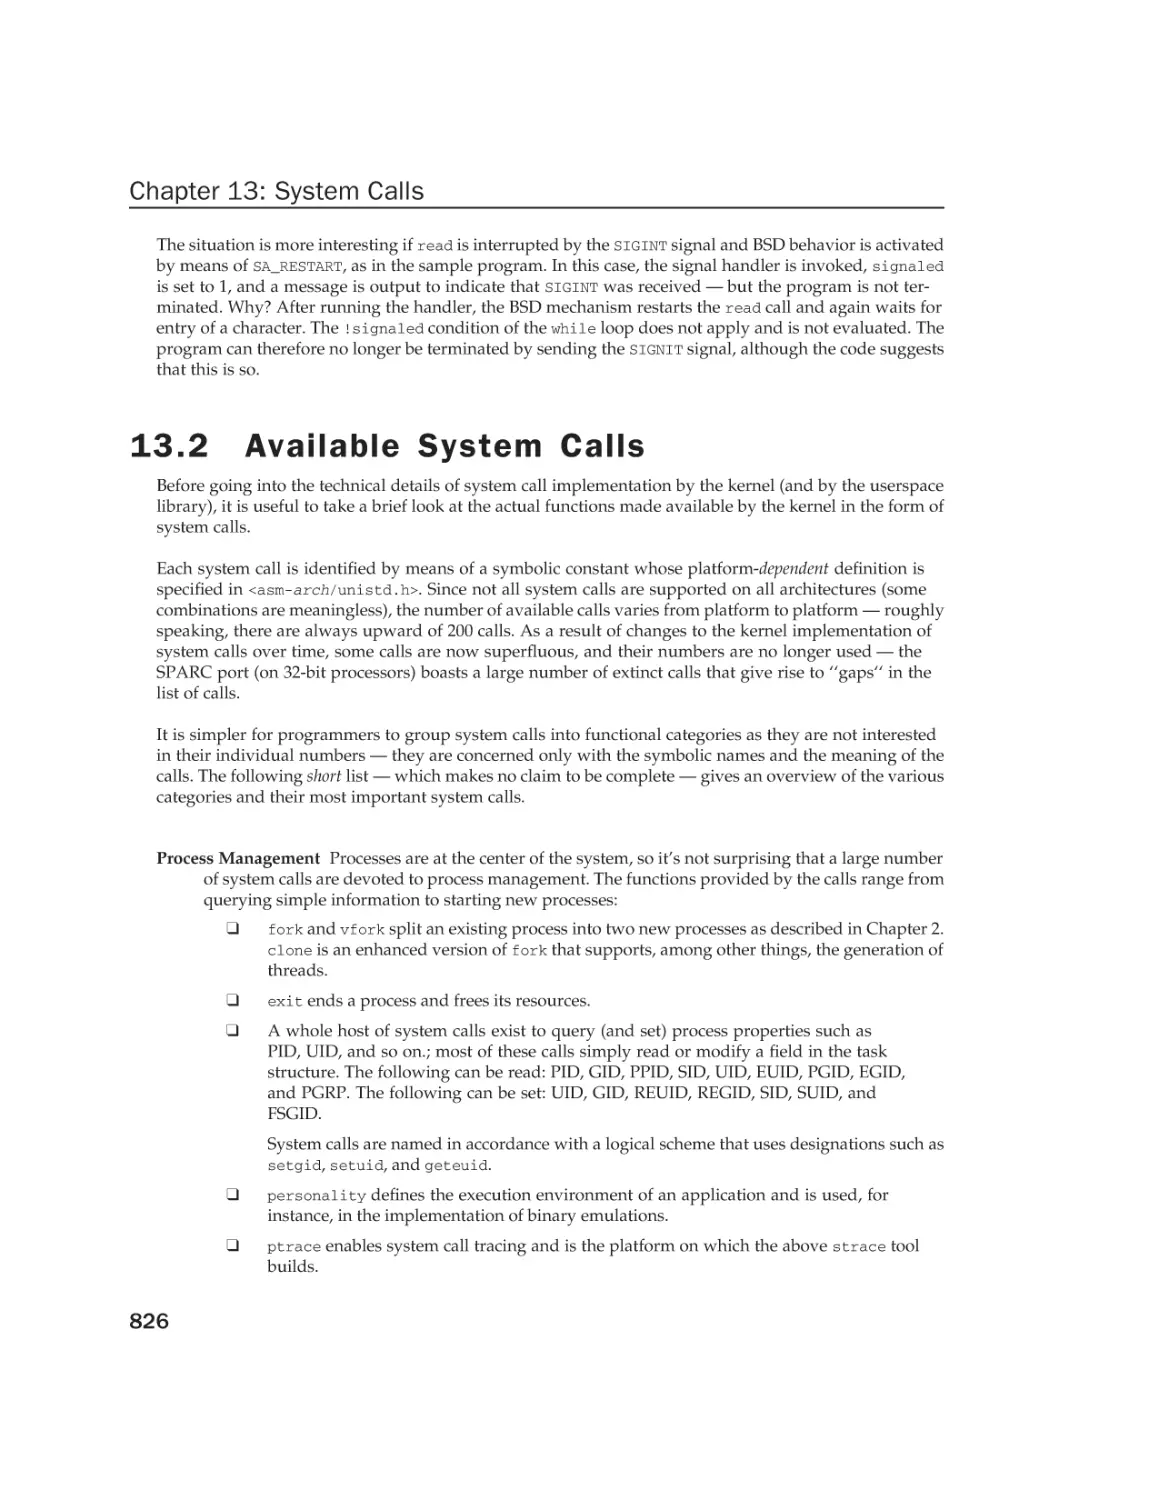 13.2 Available System Calls